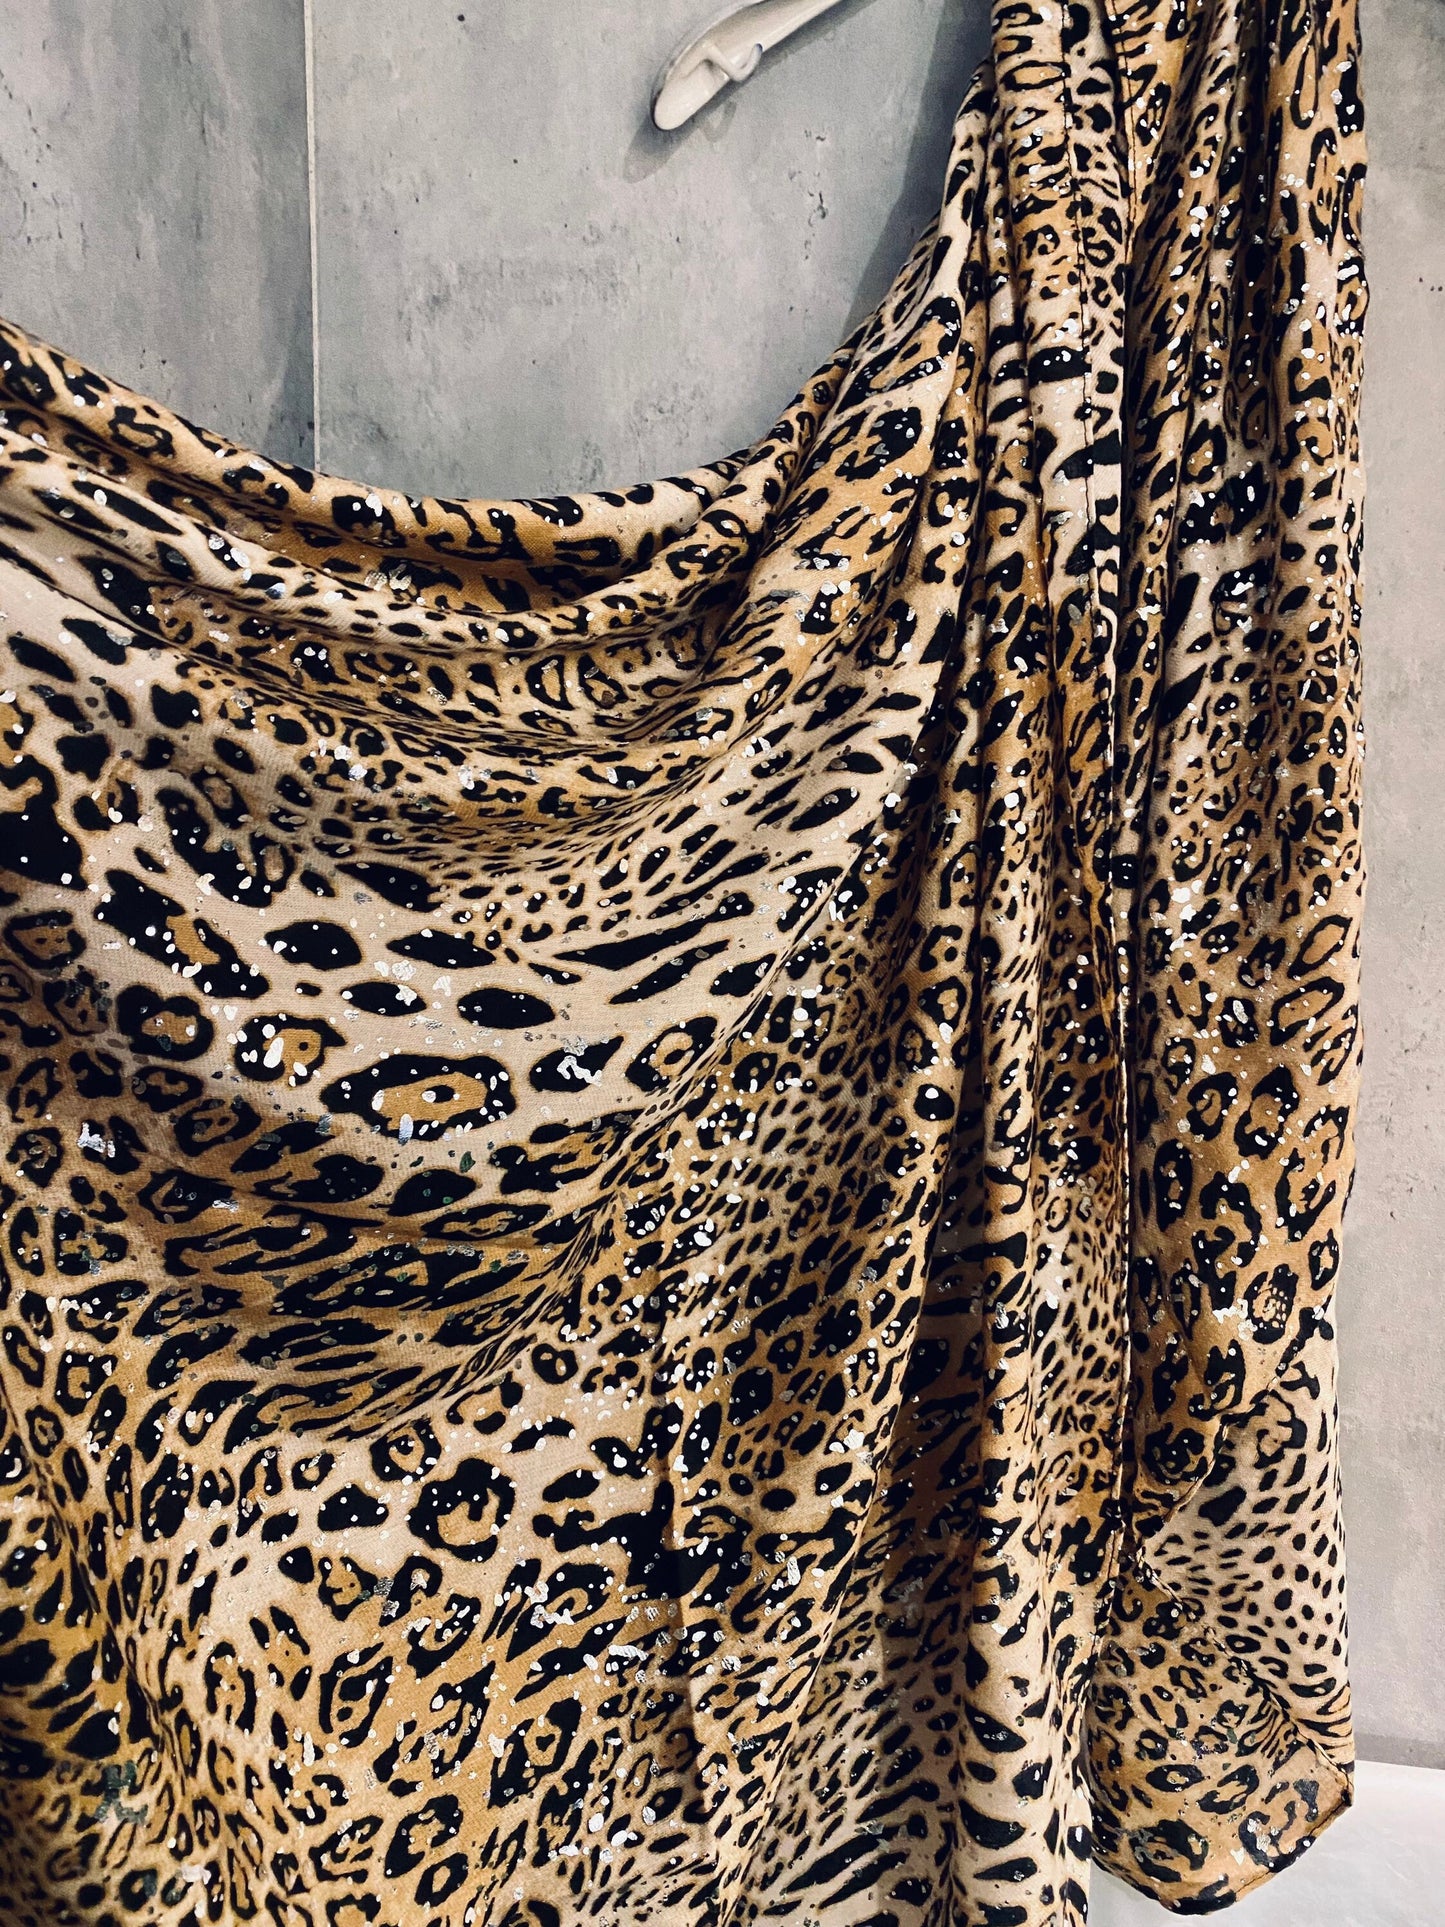 Glitter Leopard Pattern Beige Cotton Scarf/Summer Autumn Winter Scarf/Gifts For Mom/Scarf Women/Scarf For Her Birthday Christmas/UK Seller